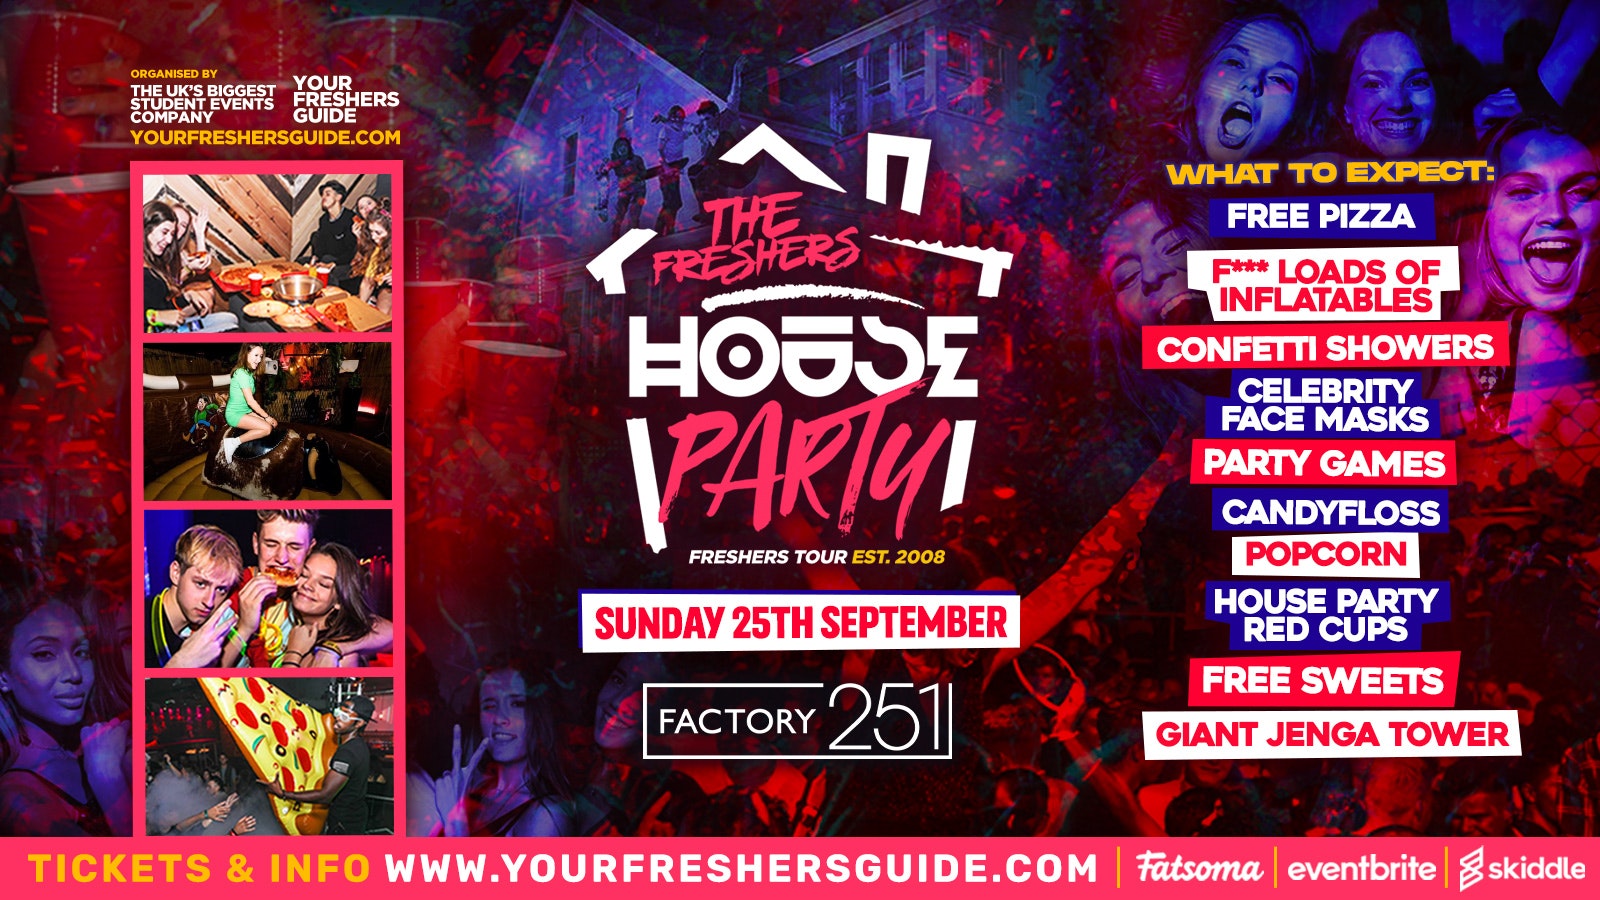 [FREE ENTRY] – The Freshers House Party @ FAC251 | Manchester Freshers 2022